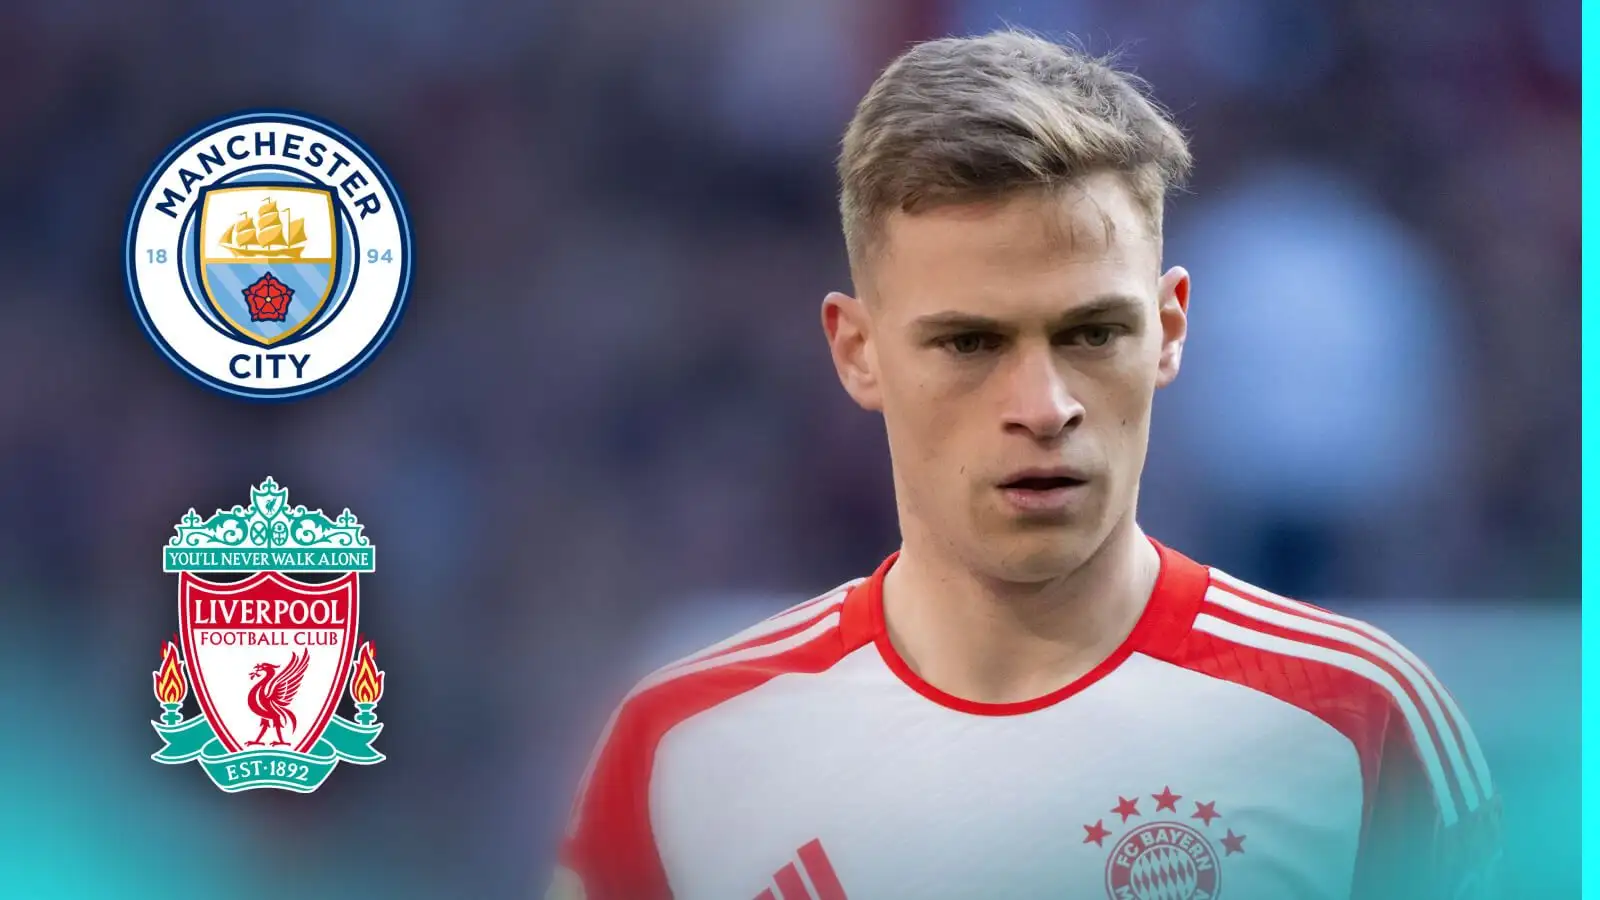 Joshua Kimmich owns been attached via Man City and Liverpool.